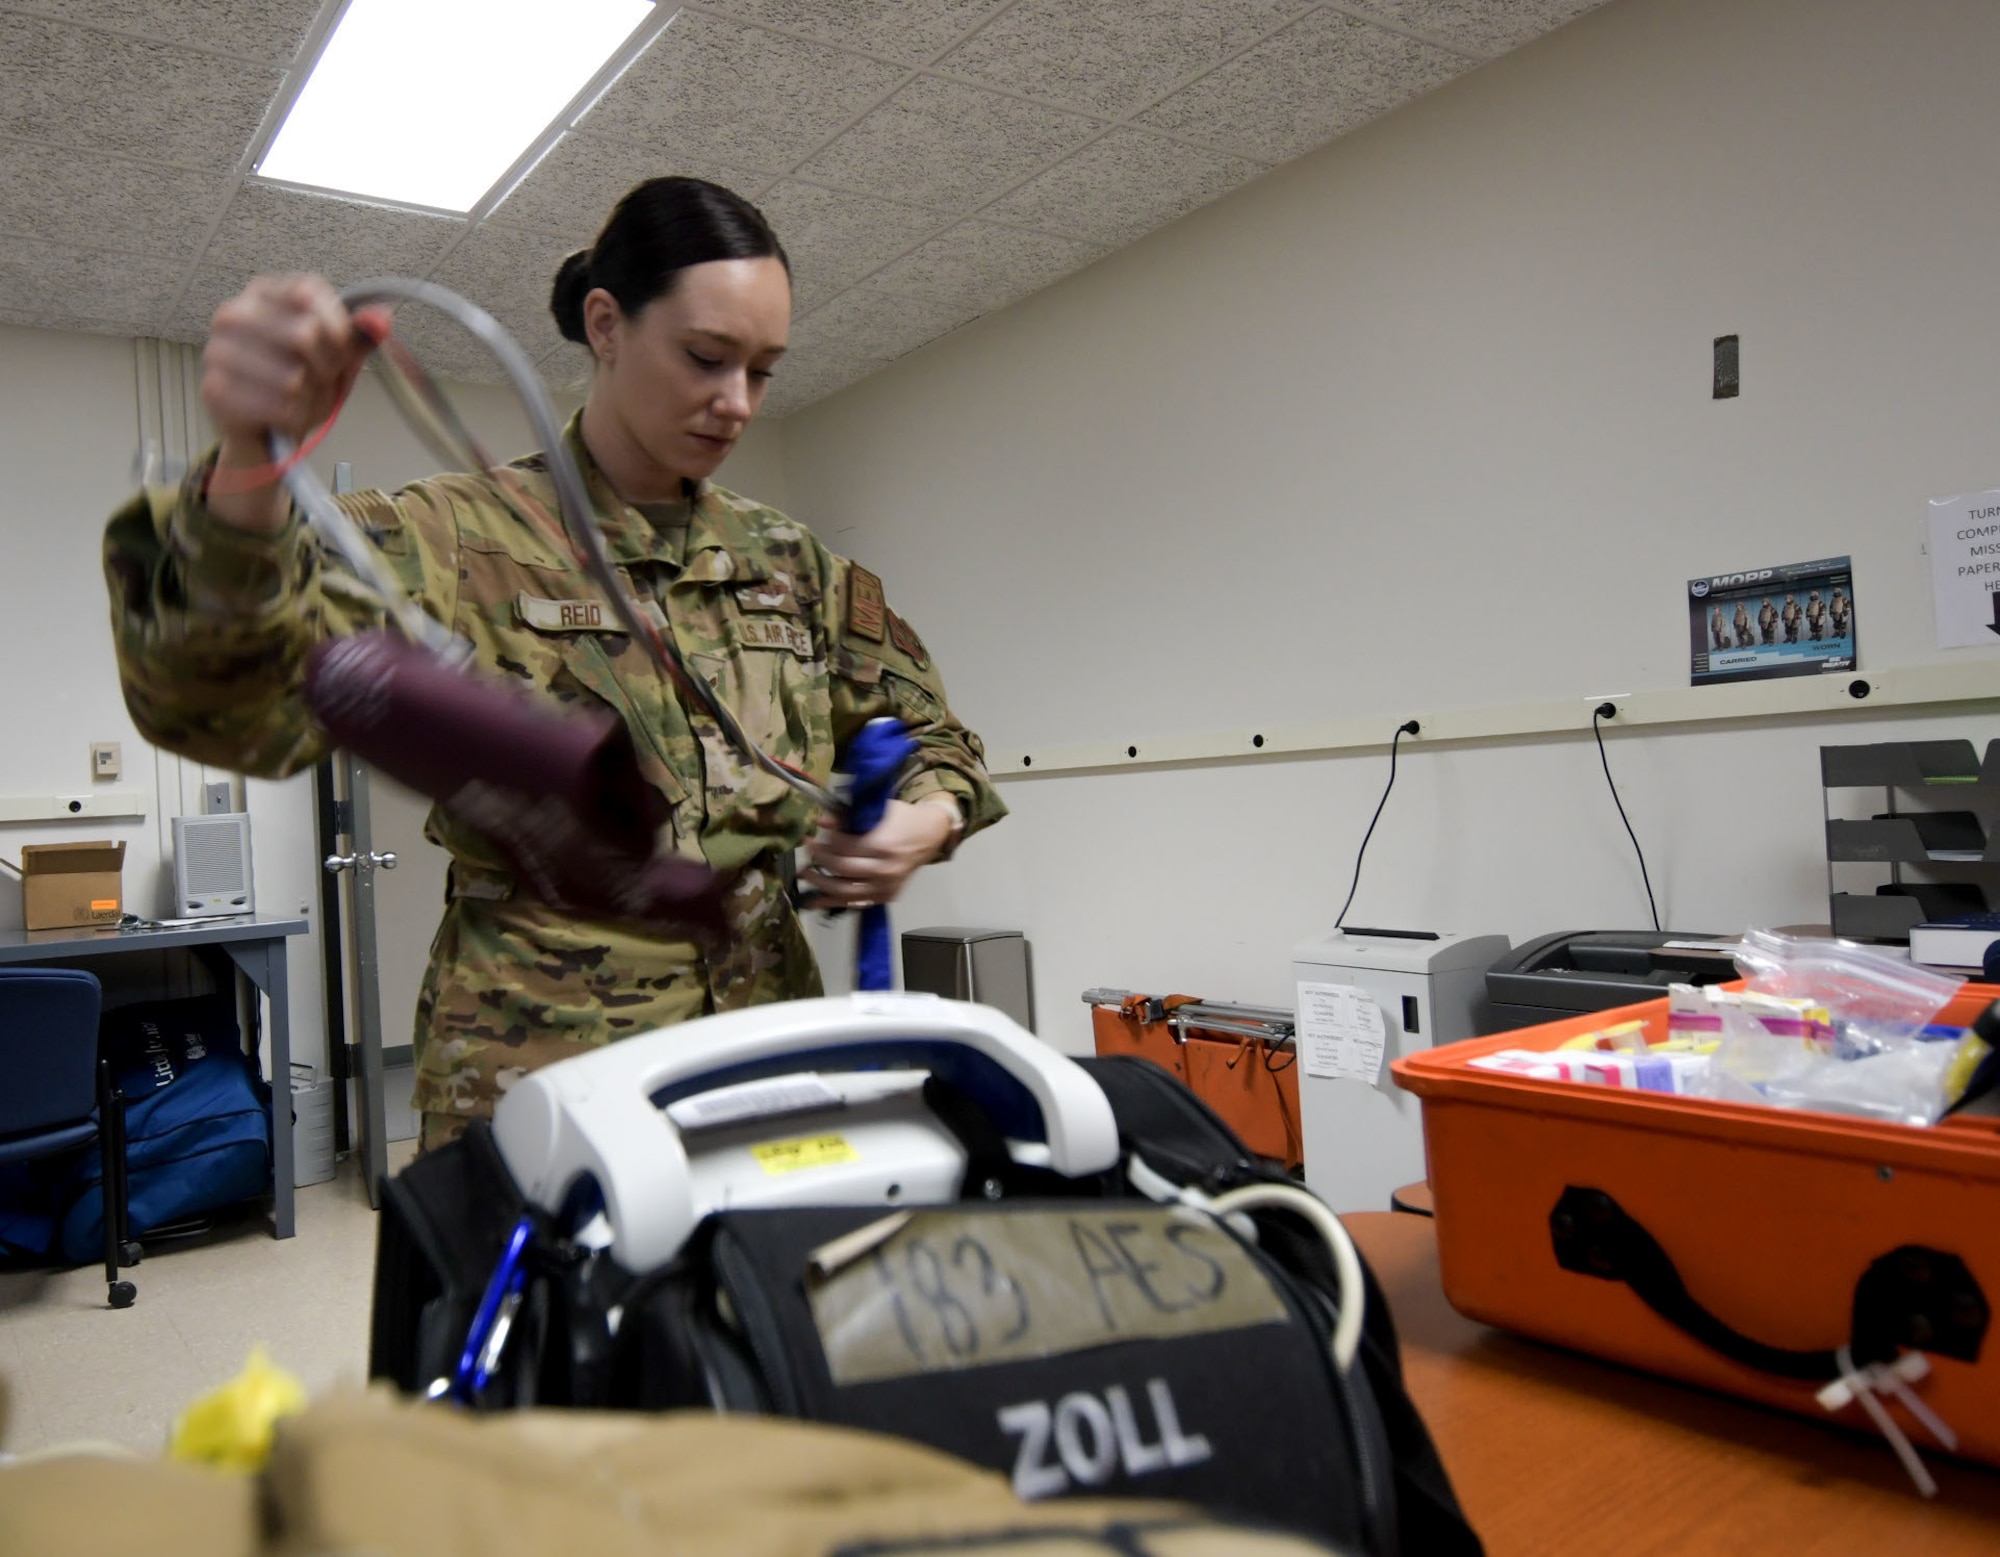 Senior Airman Abby Reid, a flight medical technician with the 183rd Aeromedical Evacuation Squadron, 172nd Airlift Wing, Jackson, Mississippi, inspects a blood pressure monitor March 6, 2022.